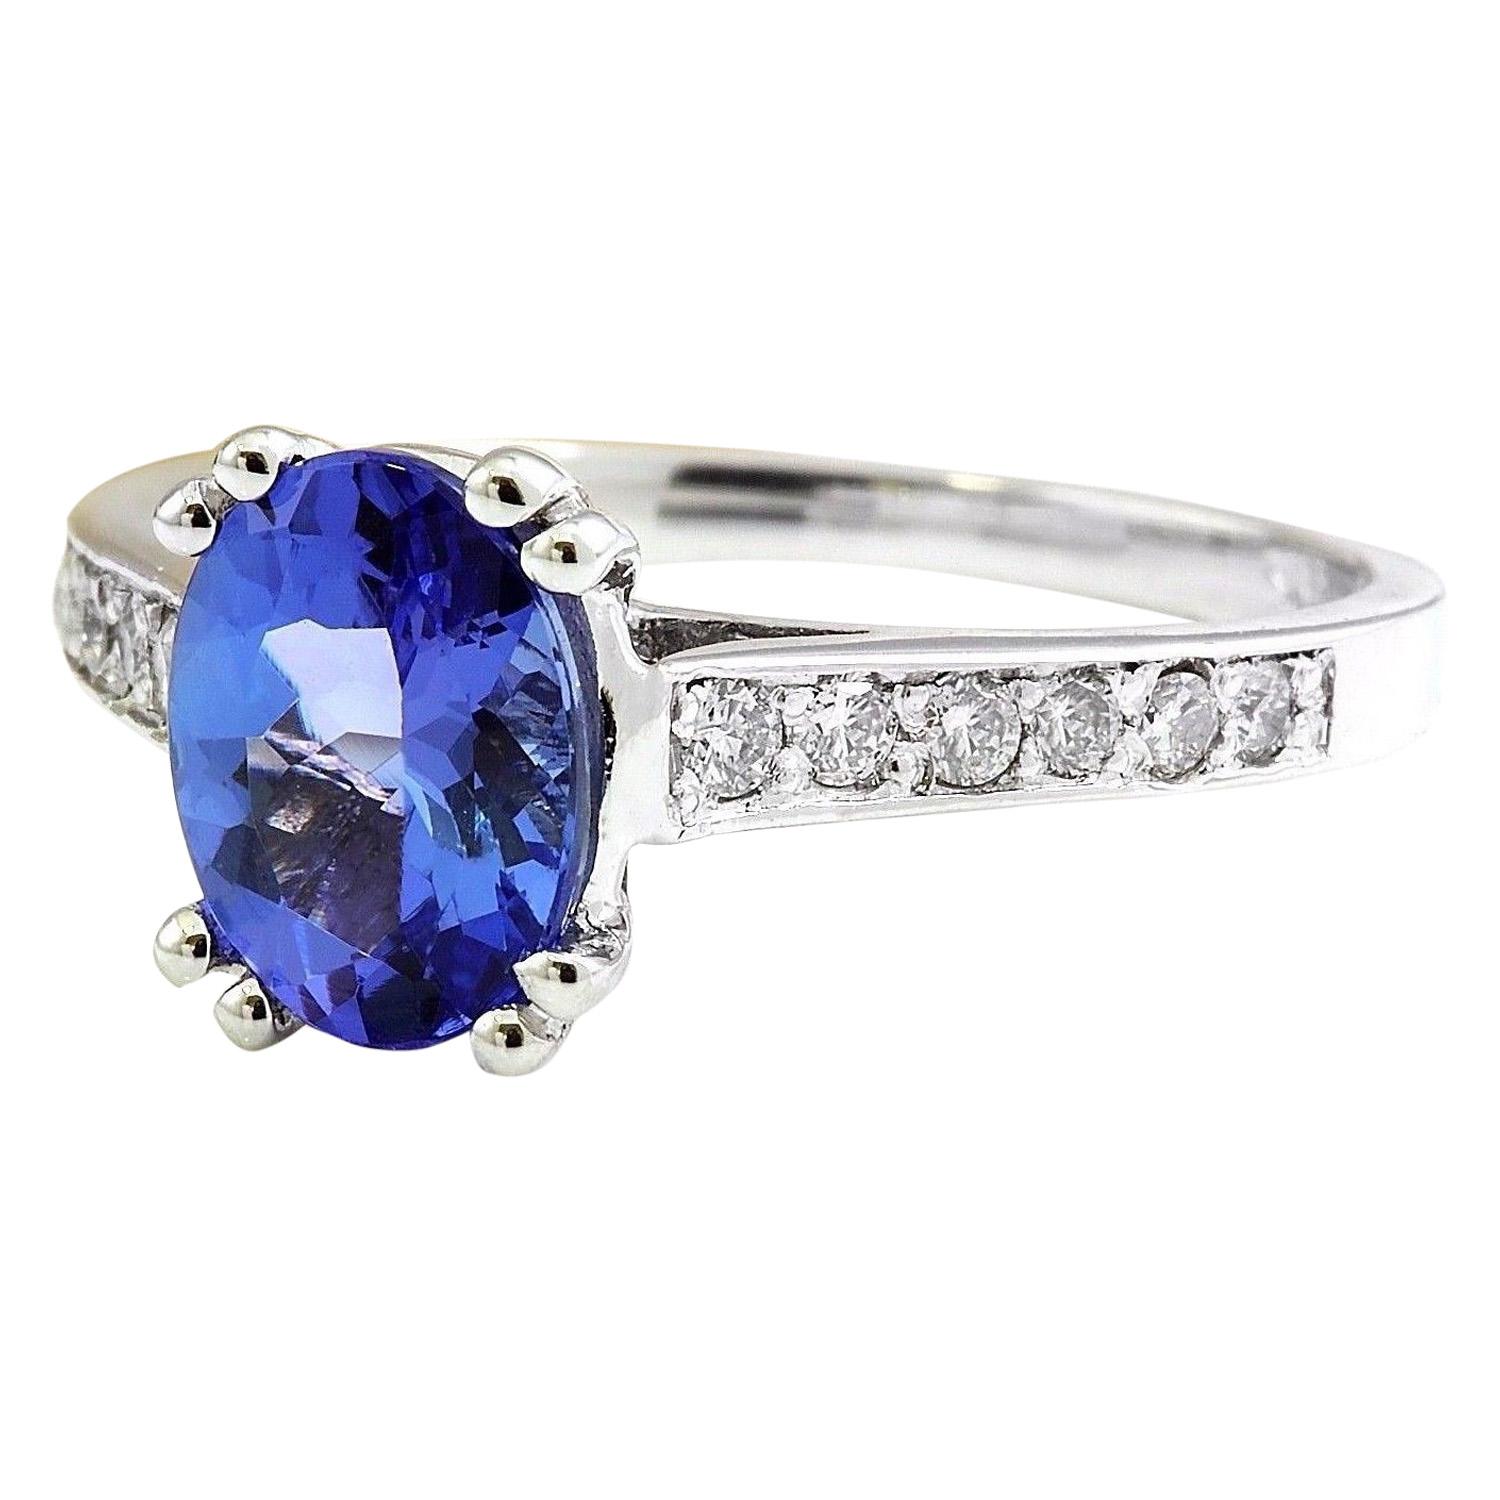 Introducing our exquisite 14 Karat White Gold Ring featuring a captivating 1.96 Carat Natural Tanzanite gemstone. Crafted with precision and elegance, this ring is adorned with a 1.78 Carat Tanzanite gemstone, measuring 8.00x6.00 mm, and accented